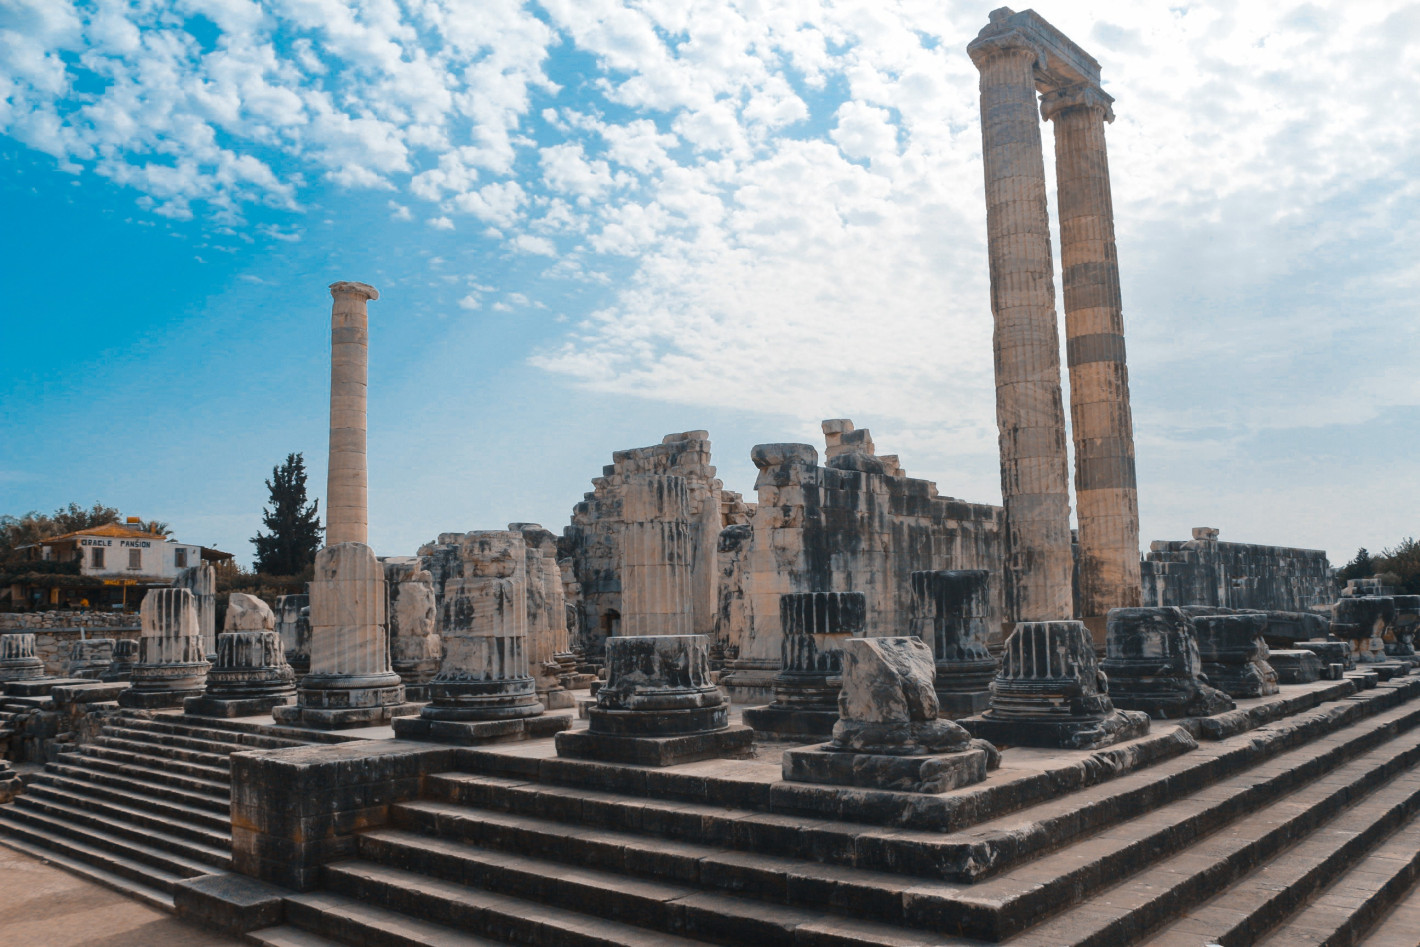 The Ionian Ancient Greek Cities and Temples Tour